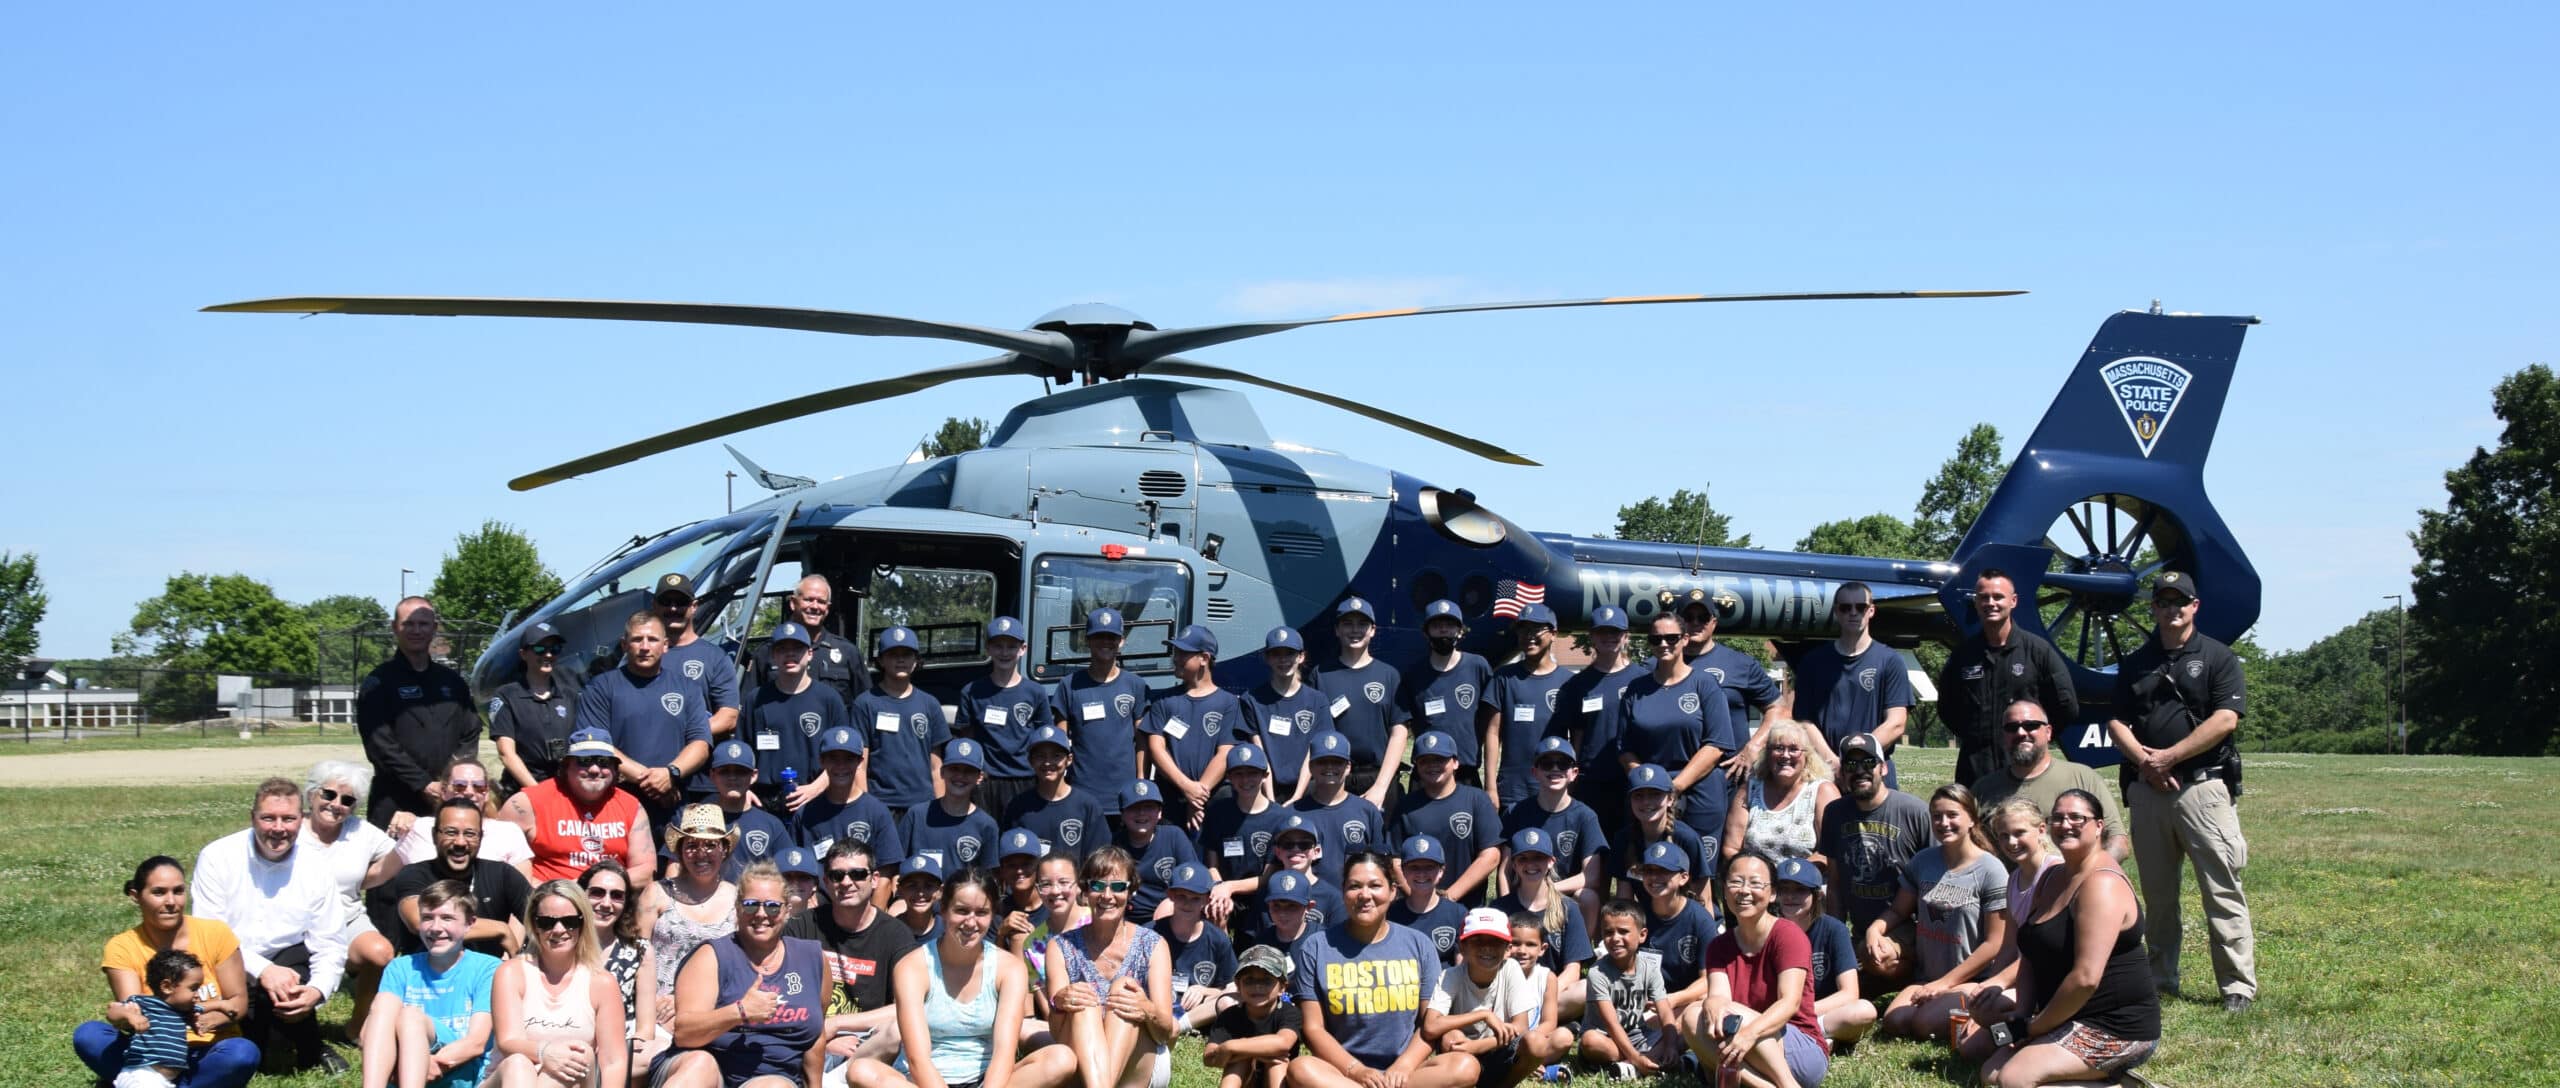 Parents, siblings, officers and cadets pose with the state police helicopter